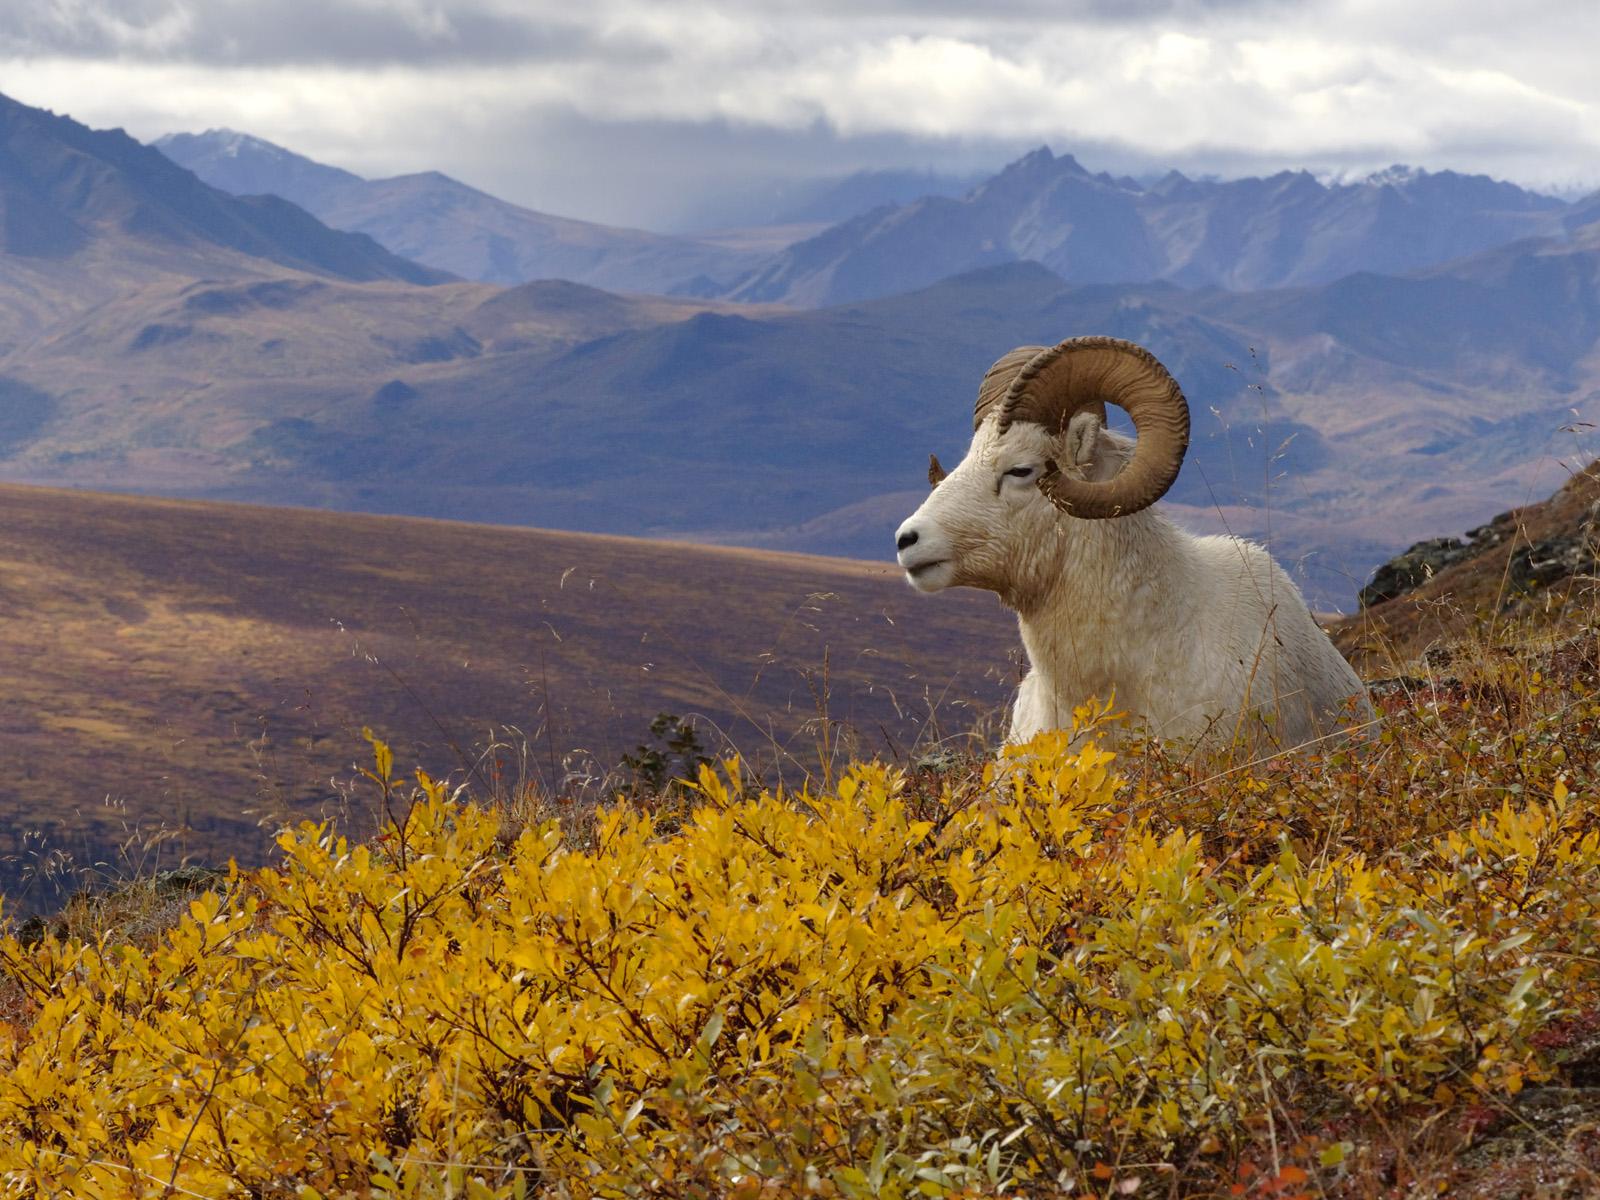 Best Dall Sheep Wallpapers on HipWallpapers